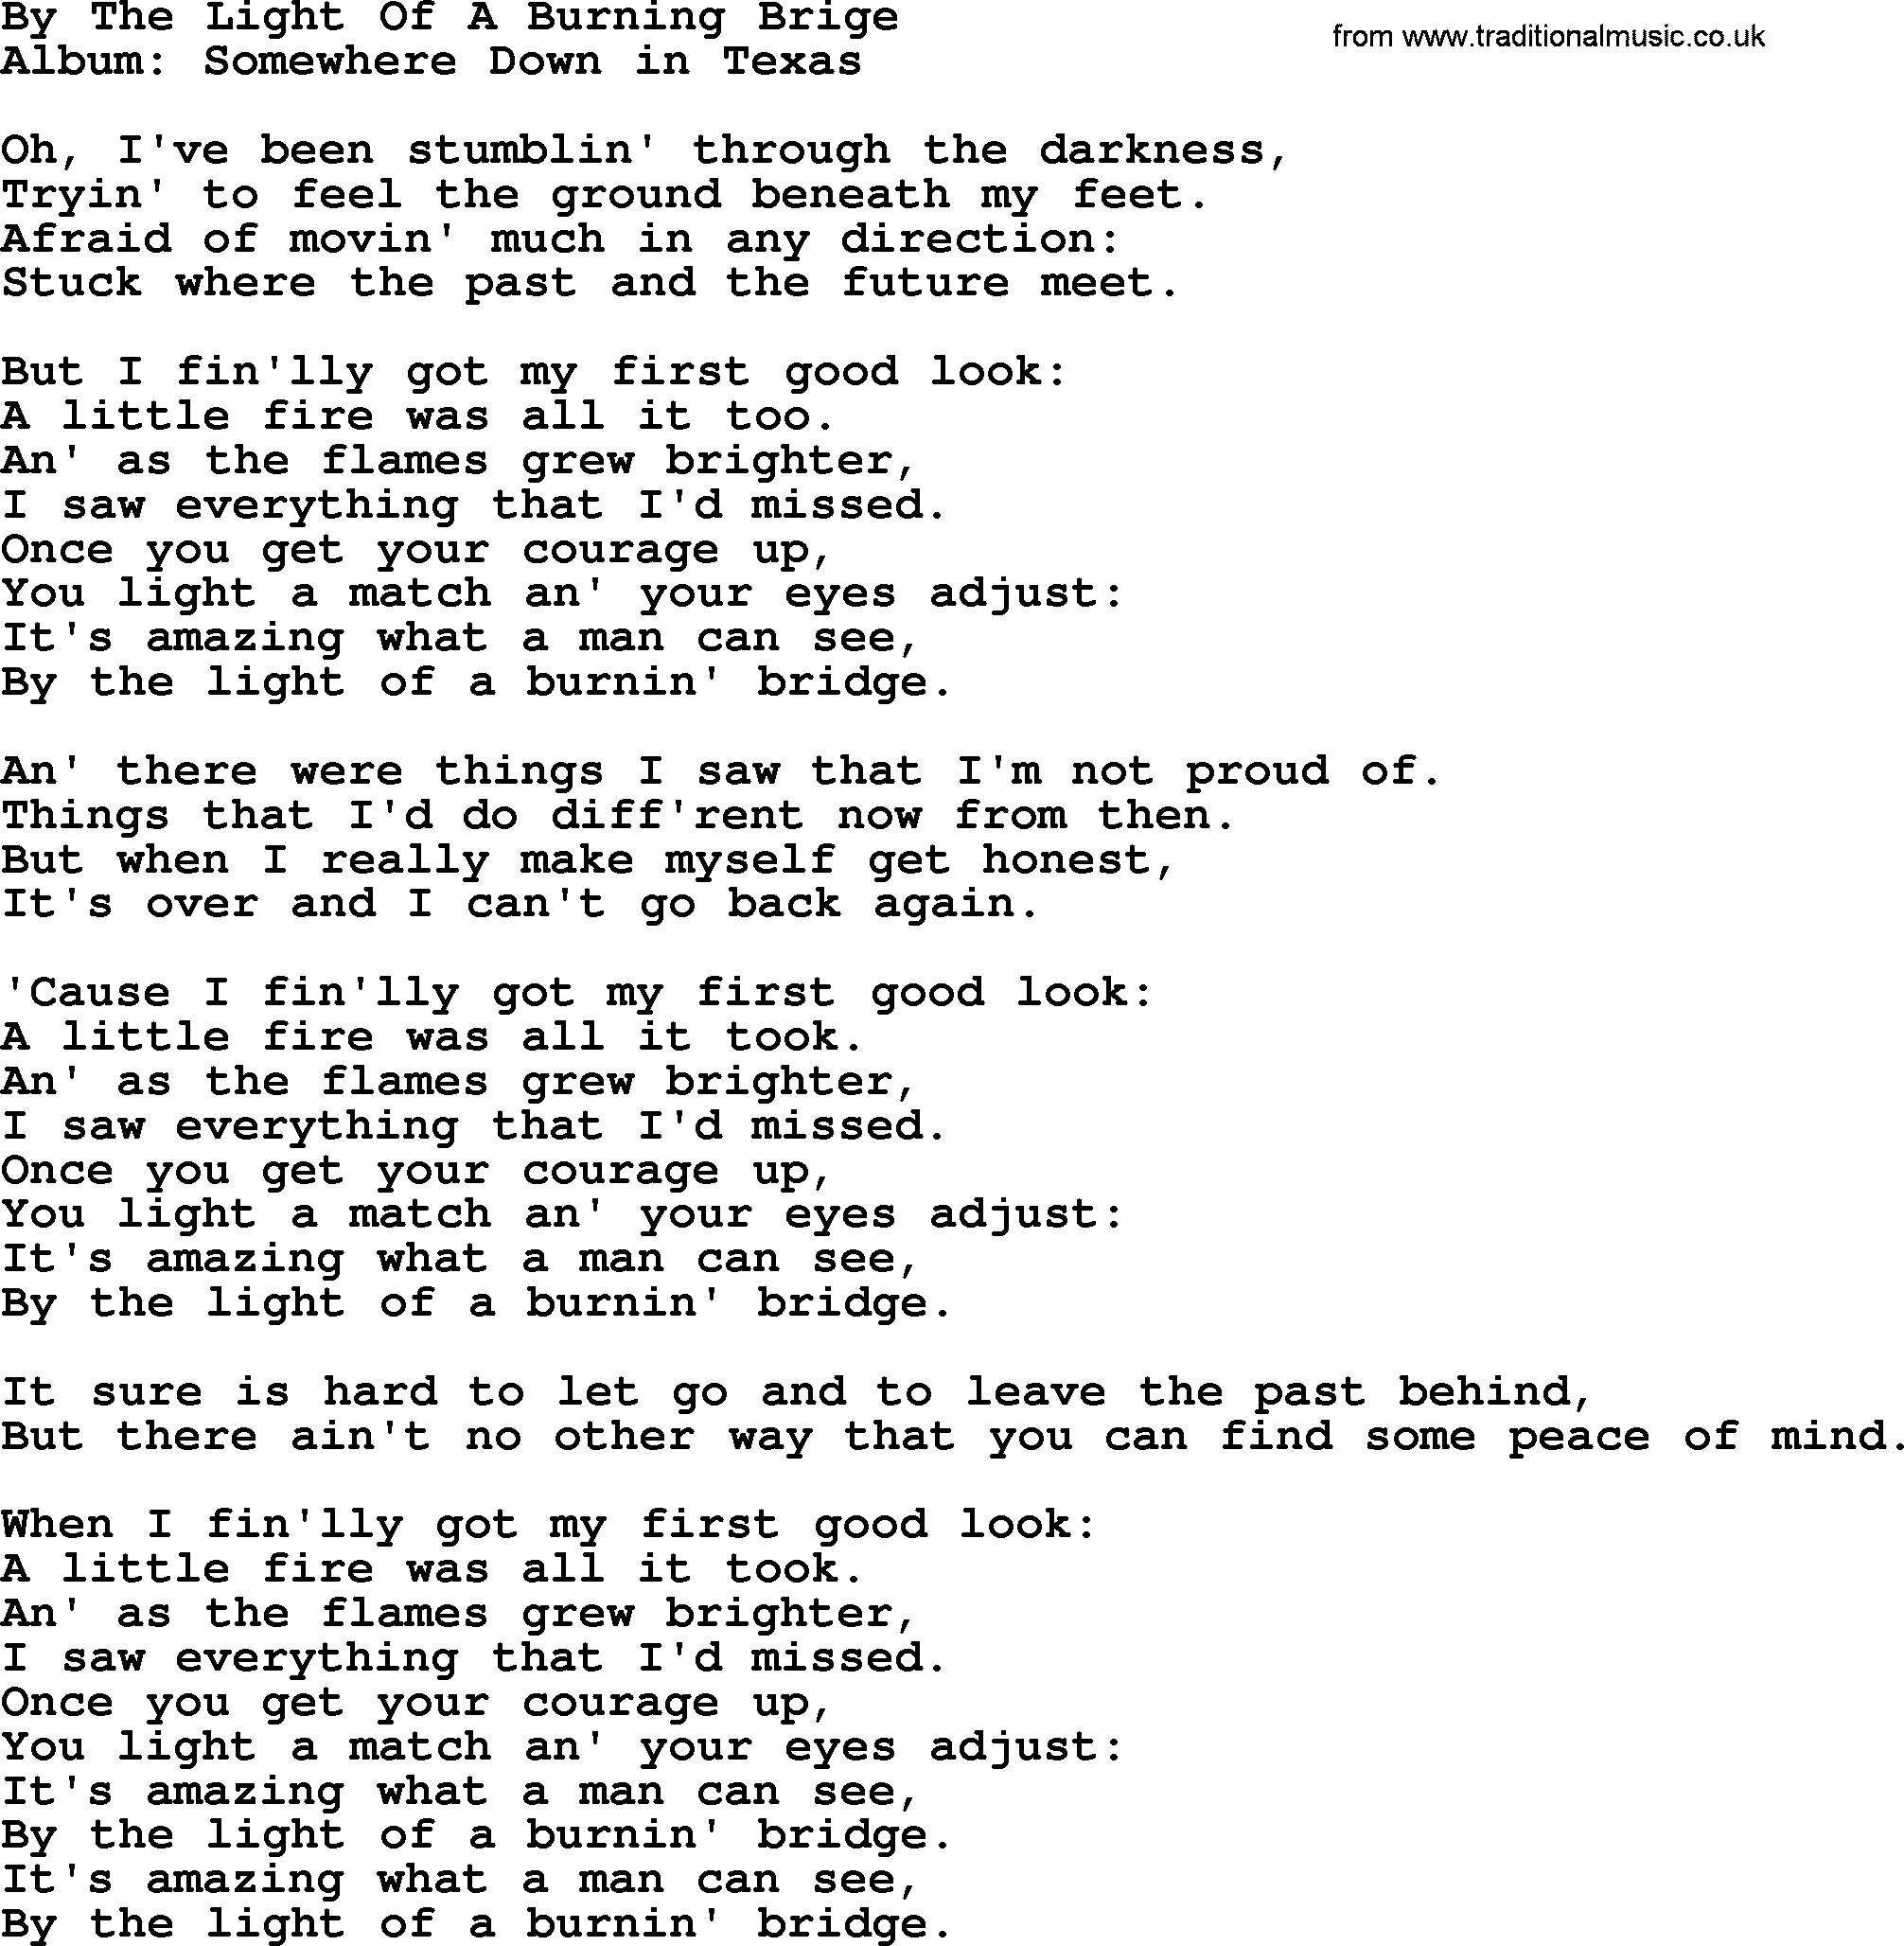 George Strait song: By The Light Of A Burning Brige, lyrics